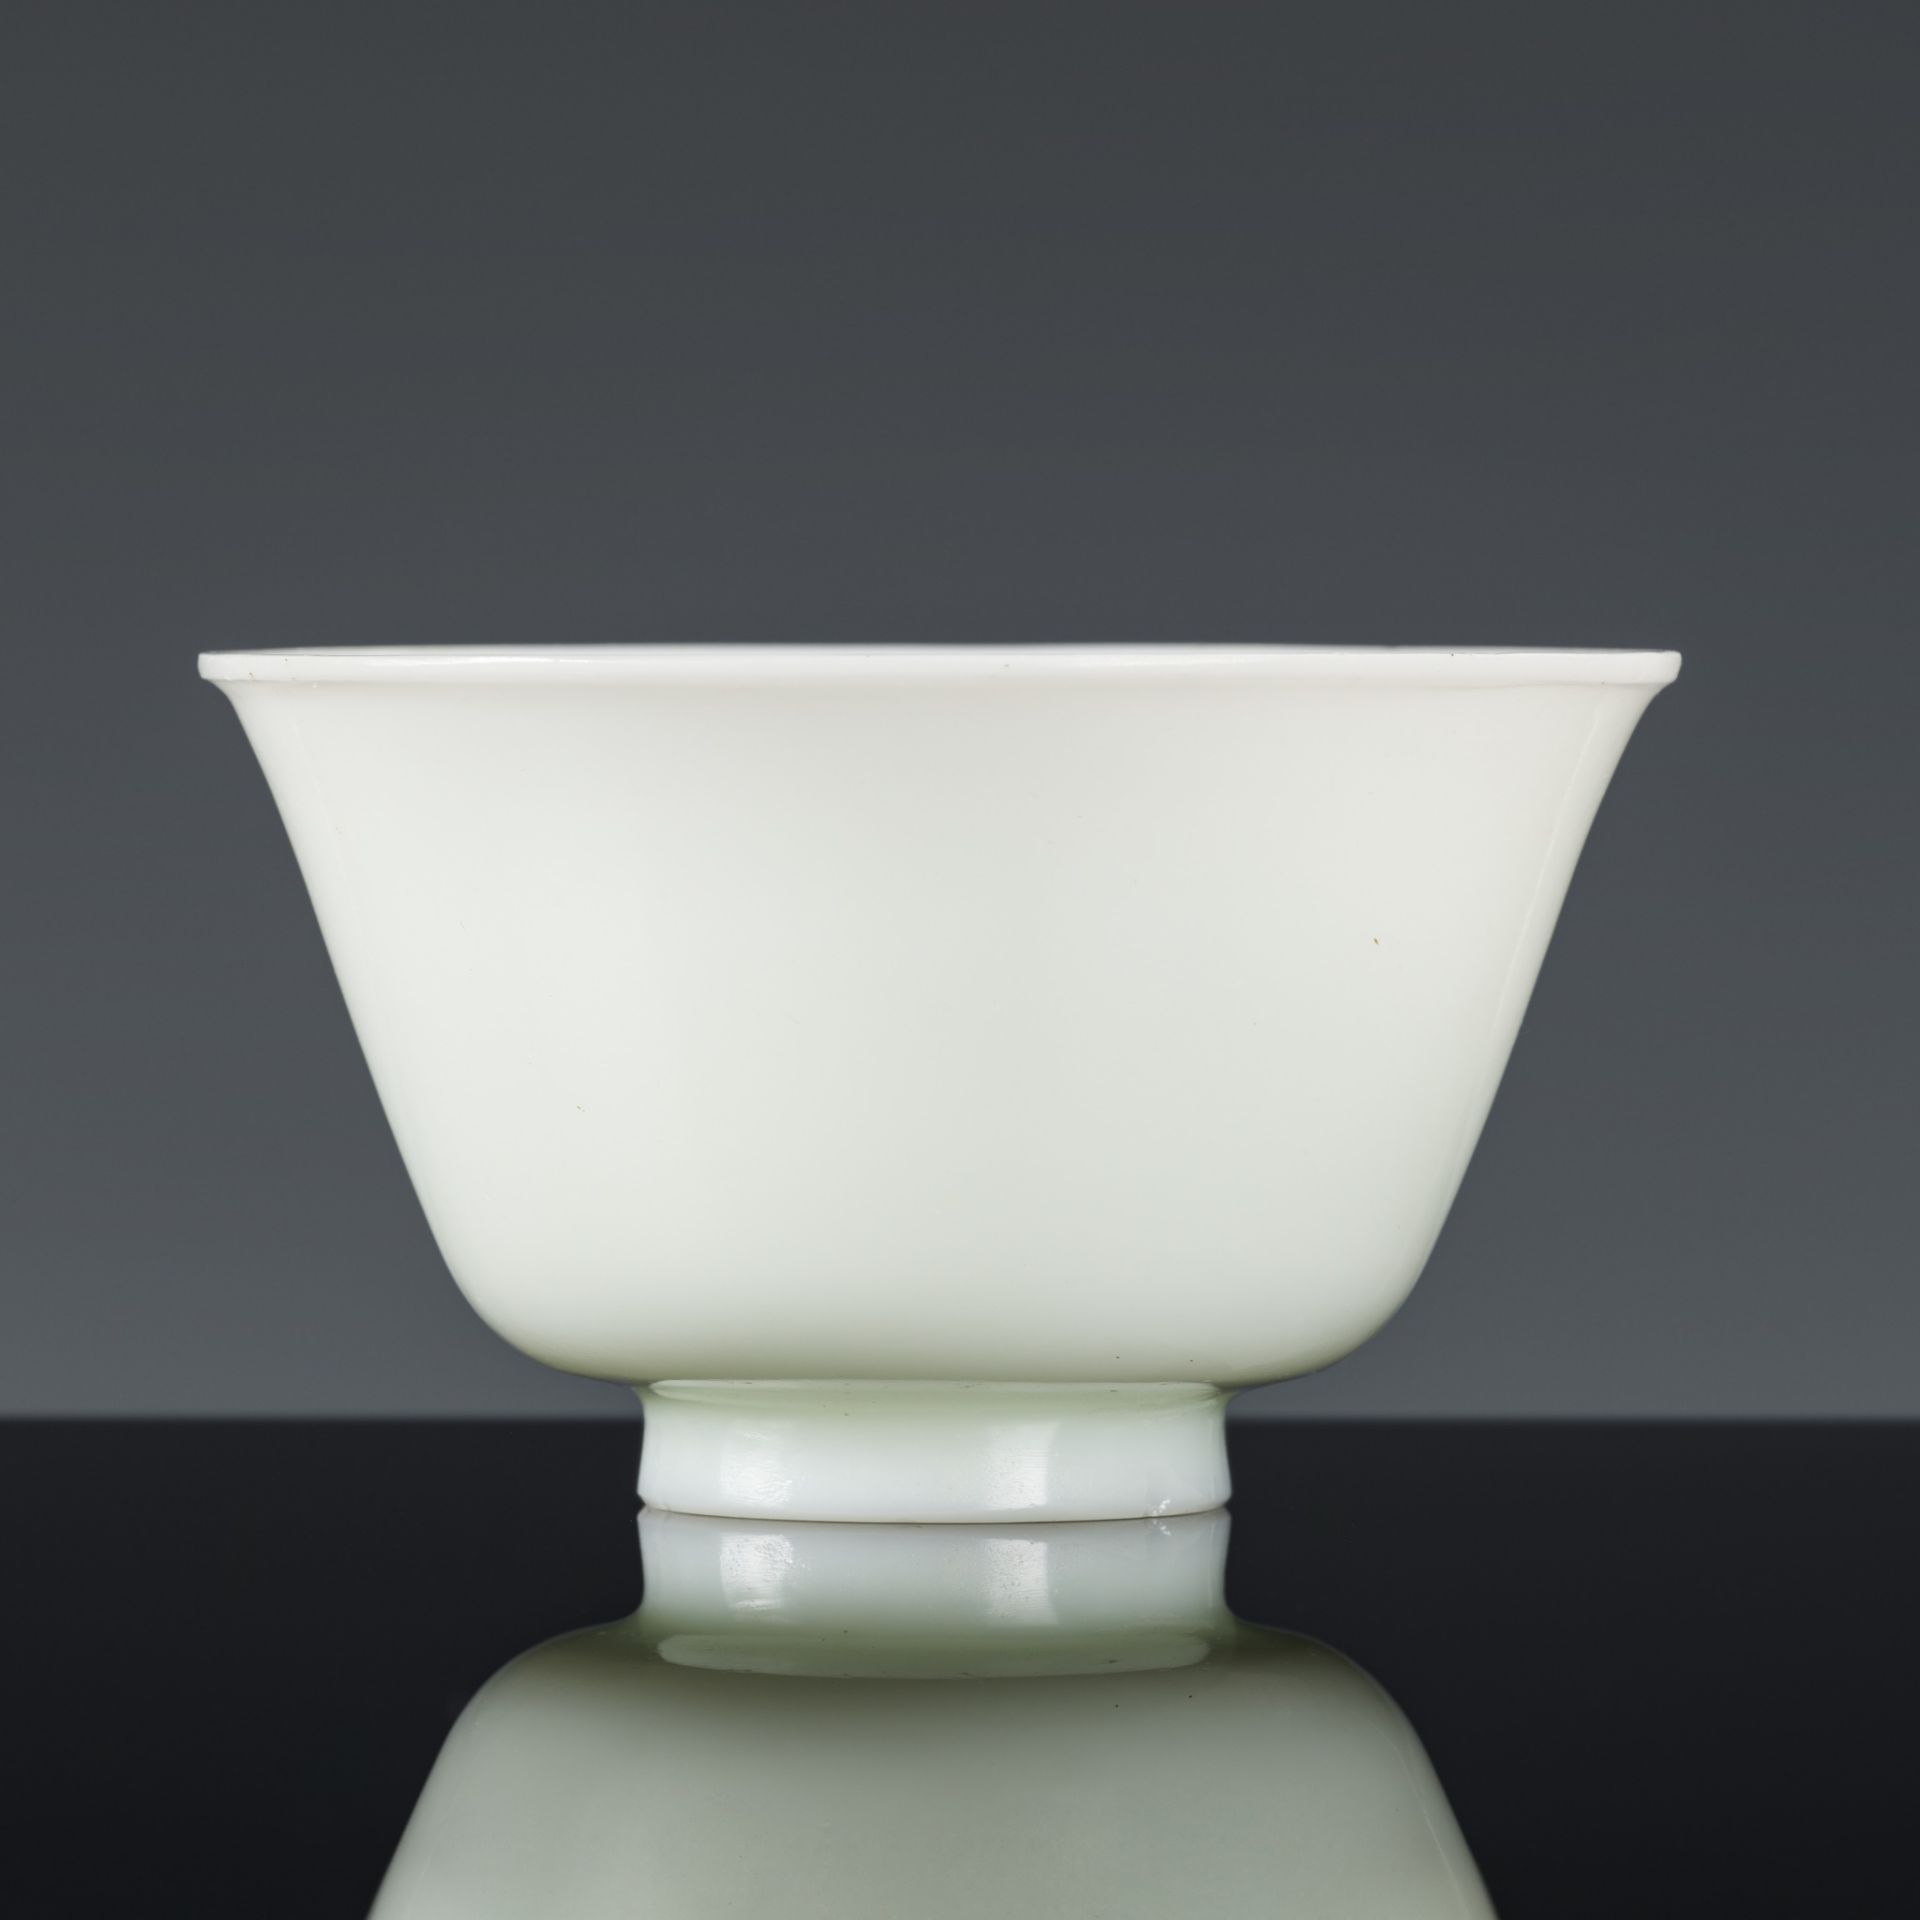 AN 'IMITATION JADE' WHITE GLASS BOWL, MID-QING DYNASTY - Image 9 of 9